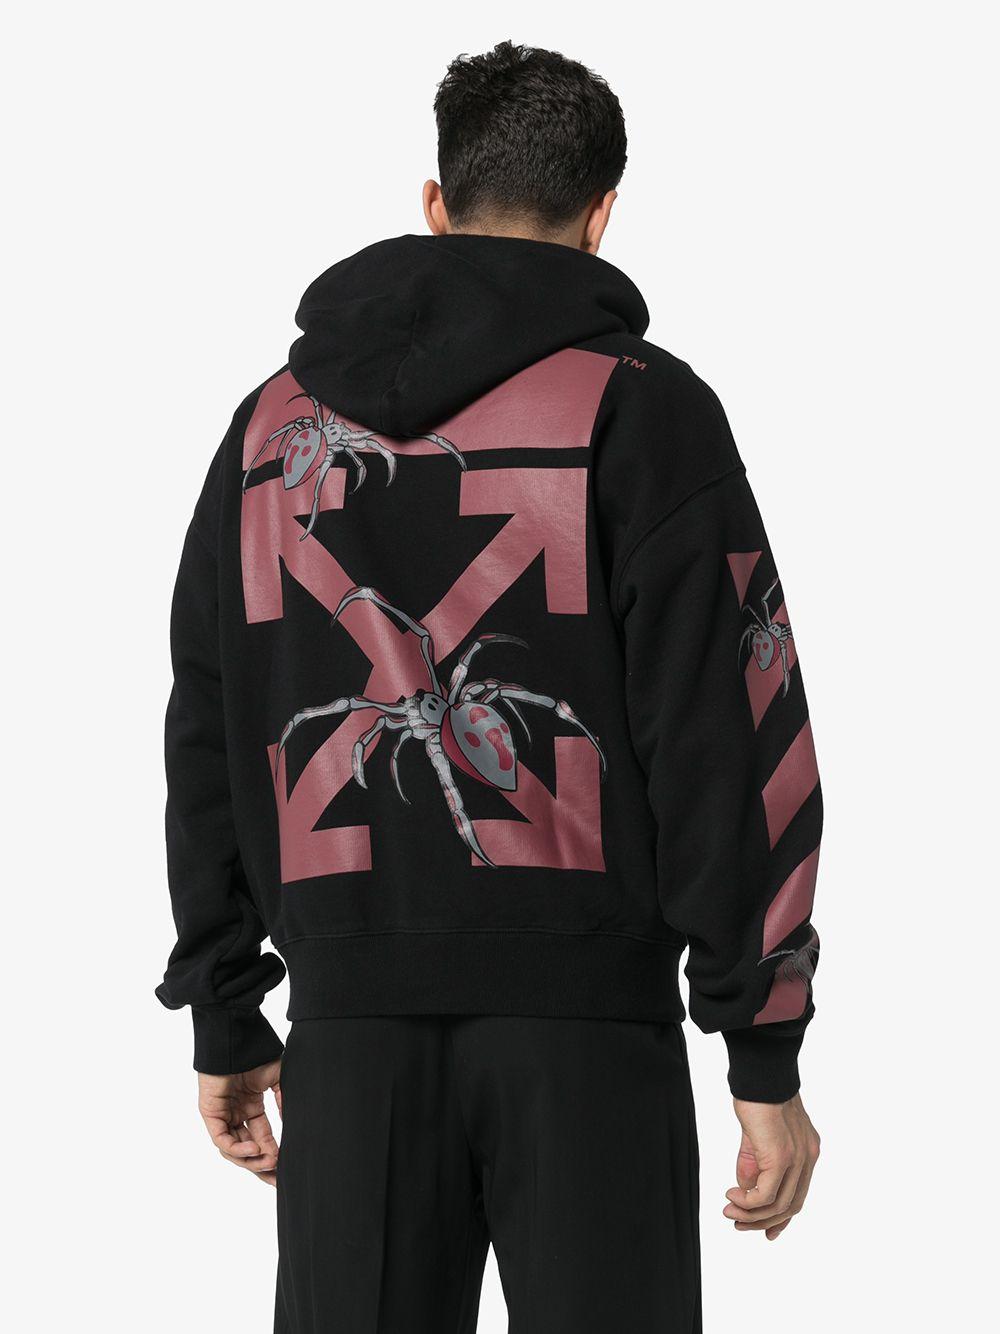 Off-White c/o Virgil Abloh Spider Arrows Print Hoodie in Black for